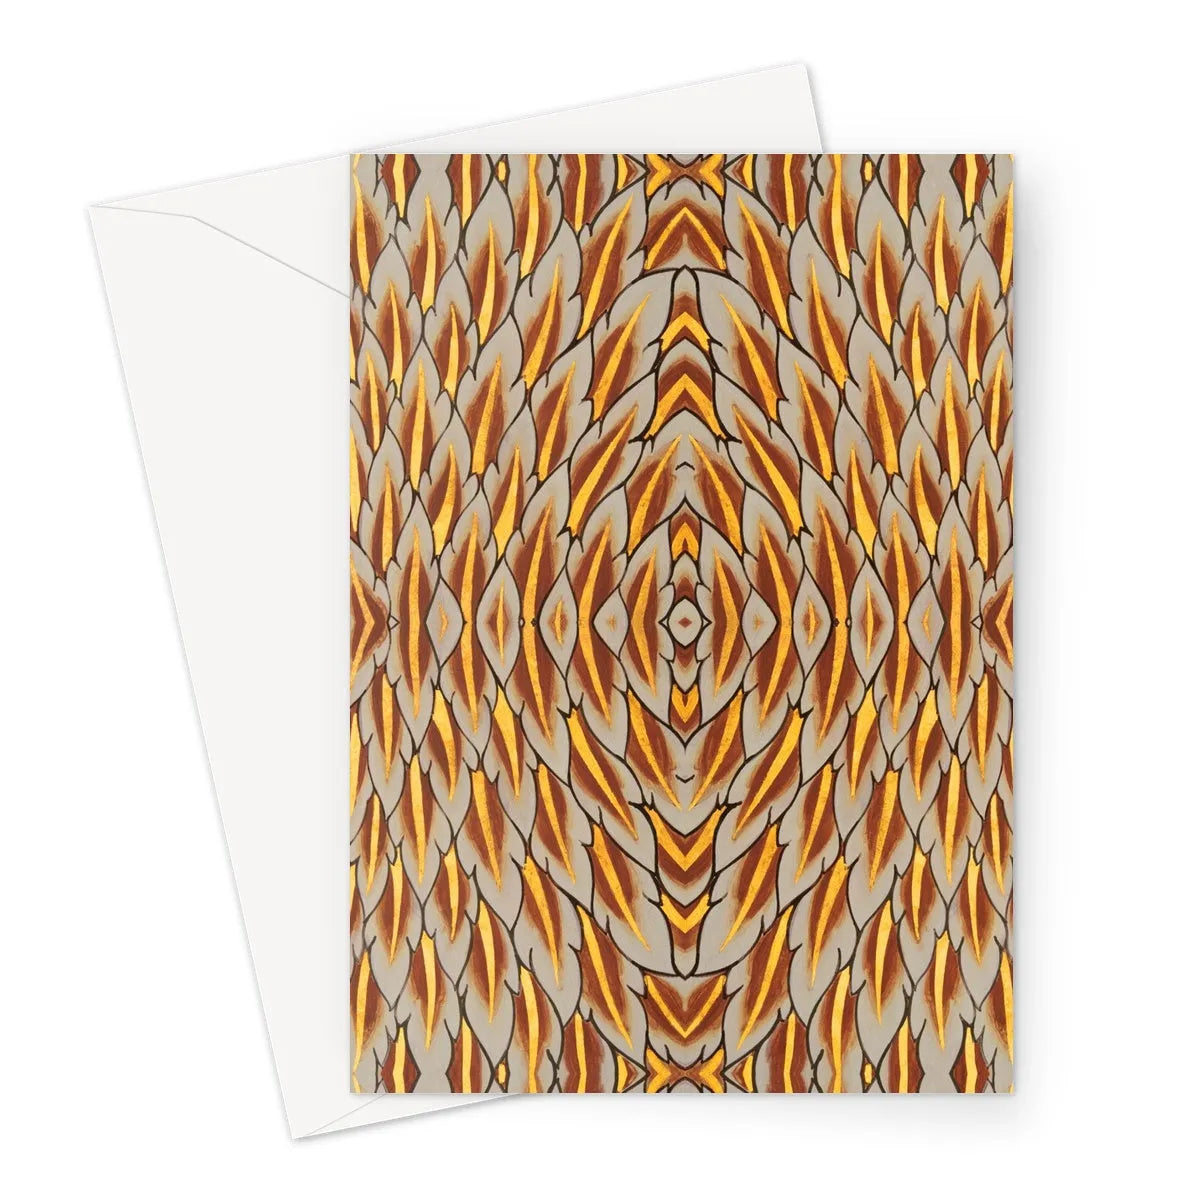 Featherweight Champion Greeting Card - A5 Portrait / 1 Card - Greeting & Note Cards - Aesthetic Art